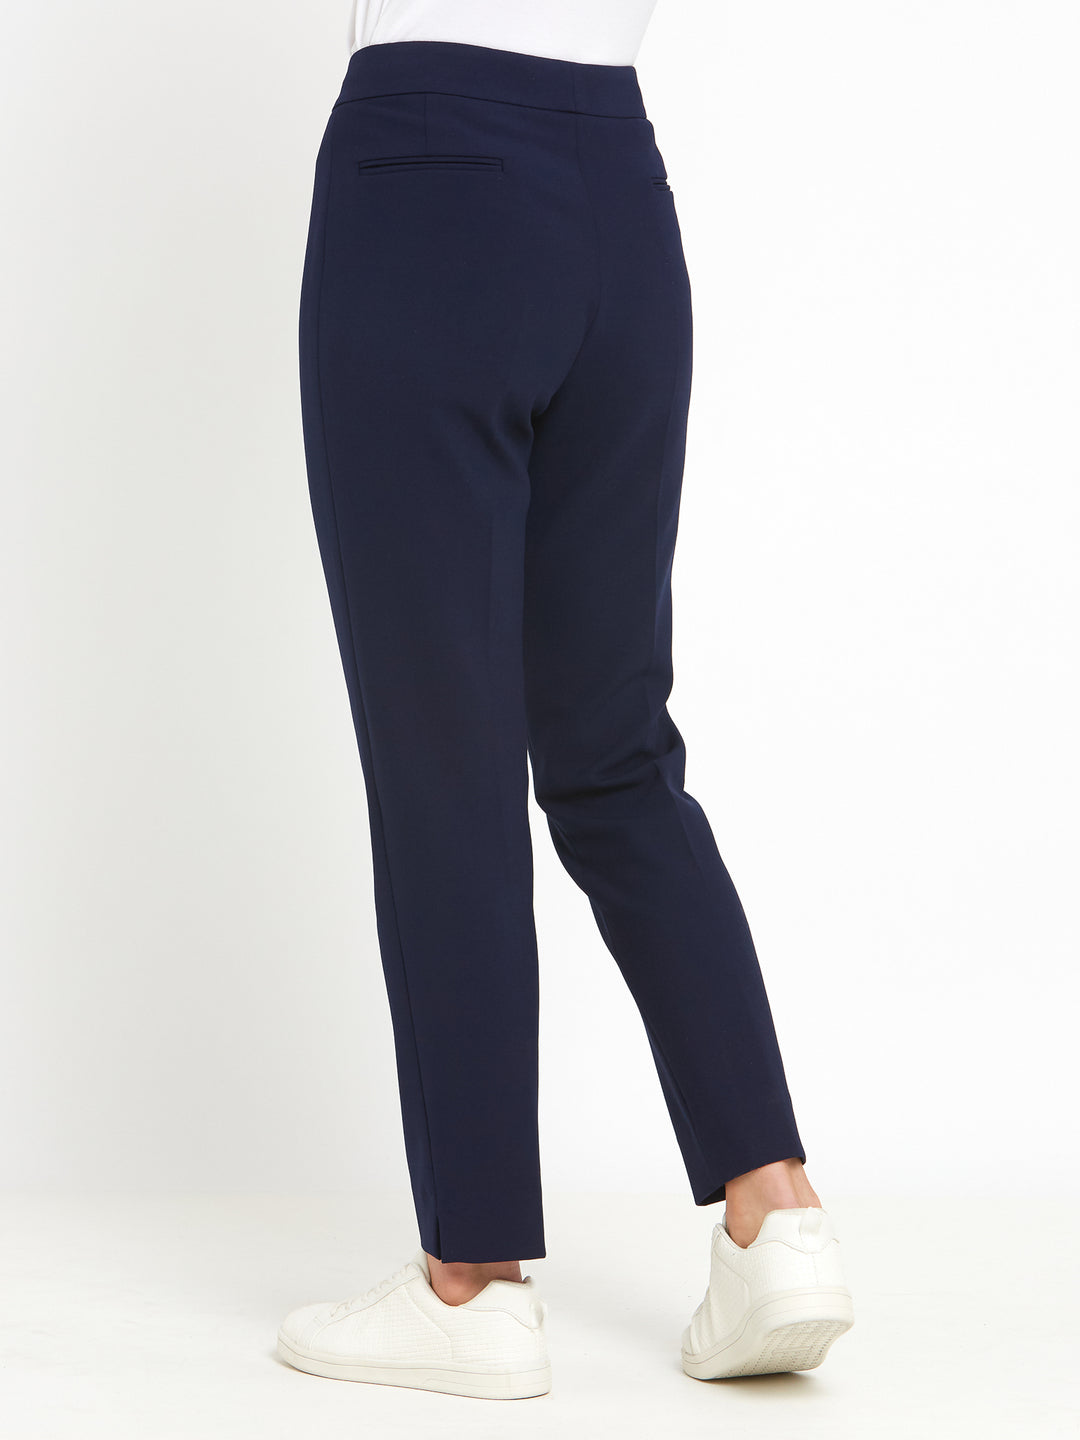 Jill is back! Investment worthy, neat narrow leg trouser with a hint of stretch. A wardrobe staple and HMcA classic, here in a sophisticated navy shade.